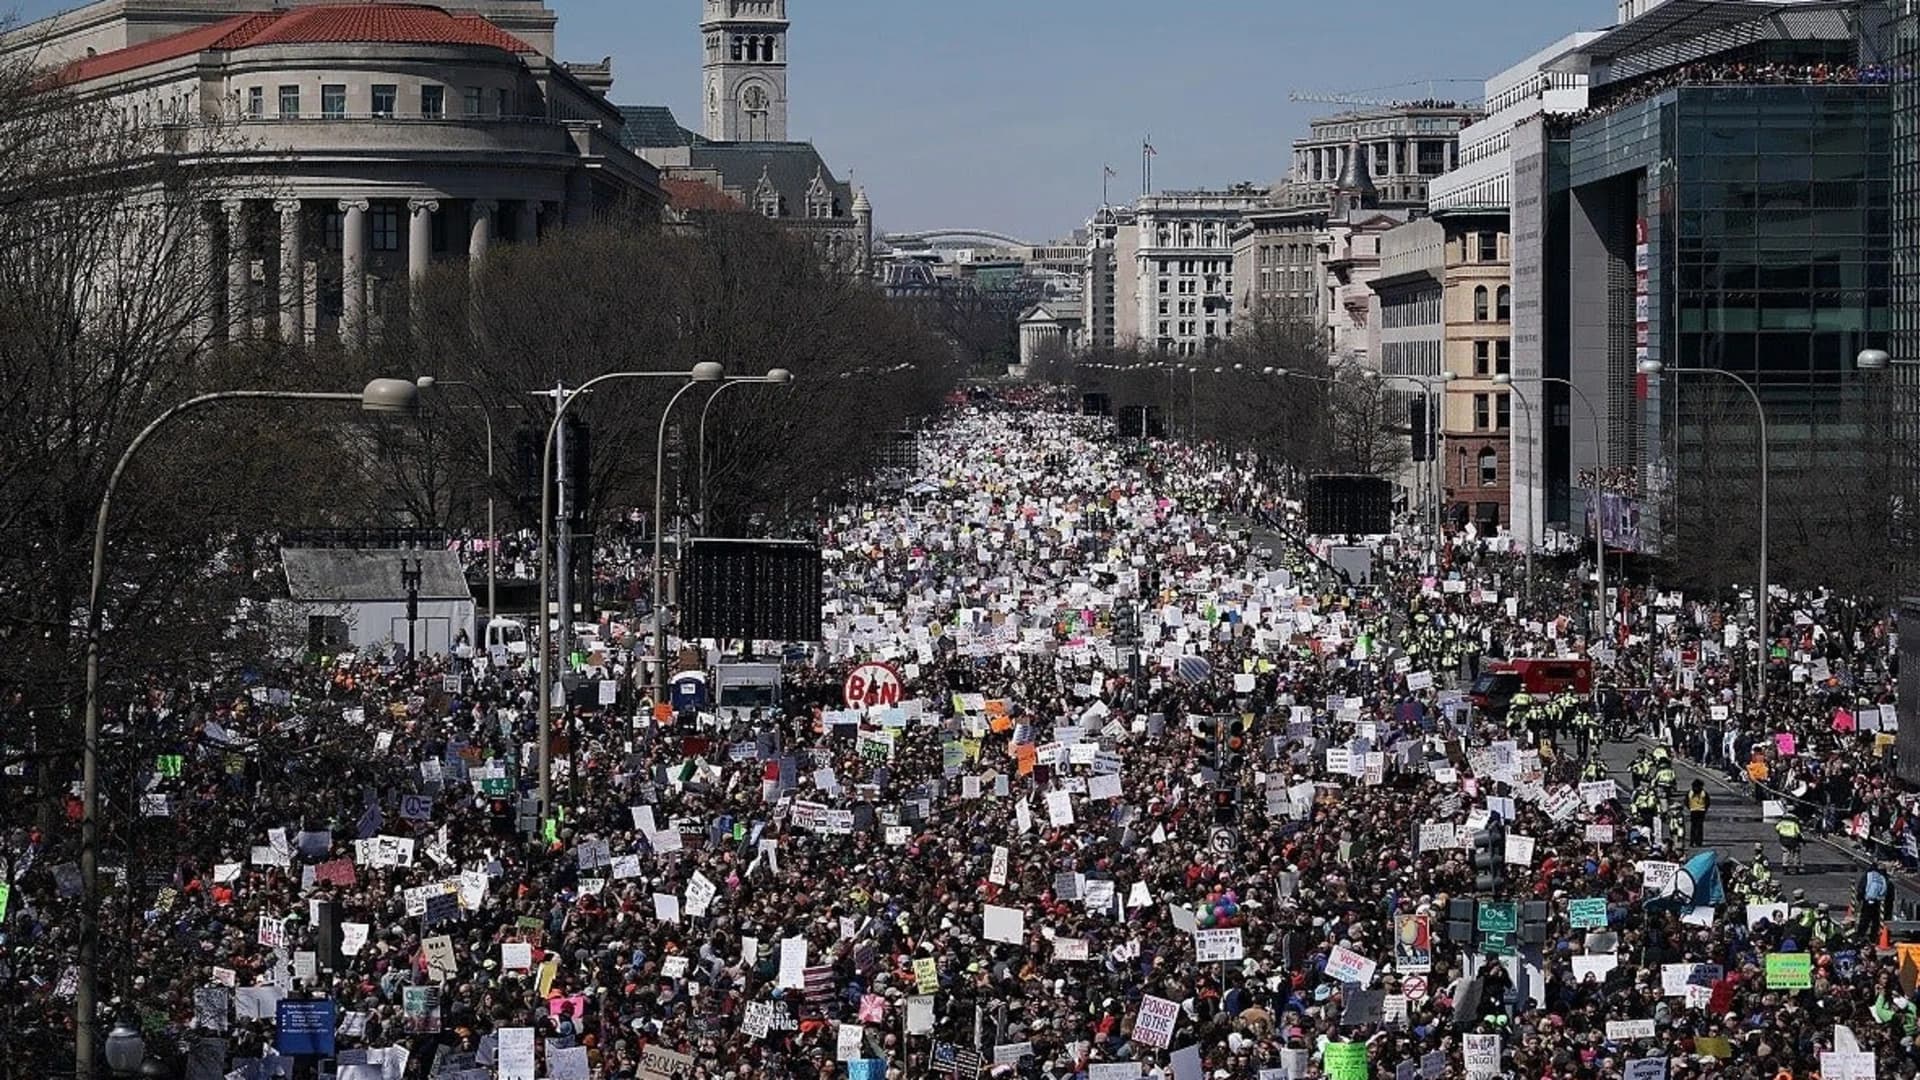 'Vote them out!': Hundreds of thousands demand gun control